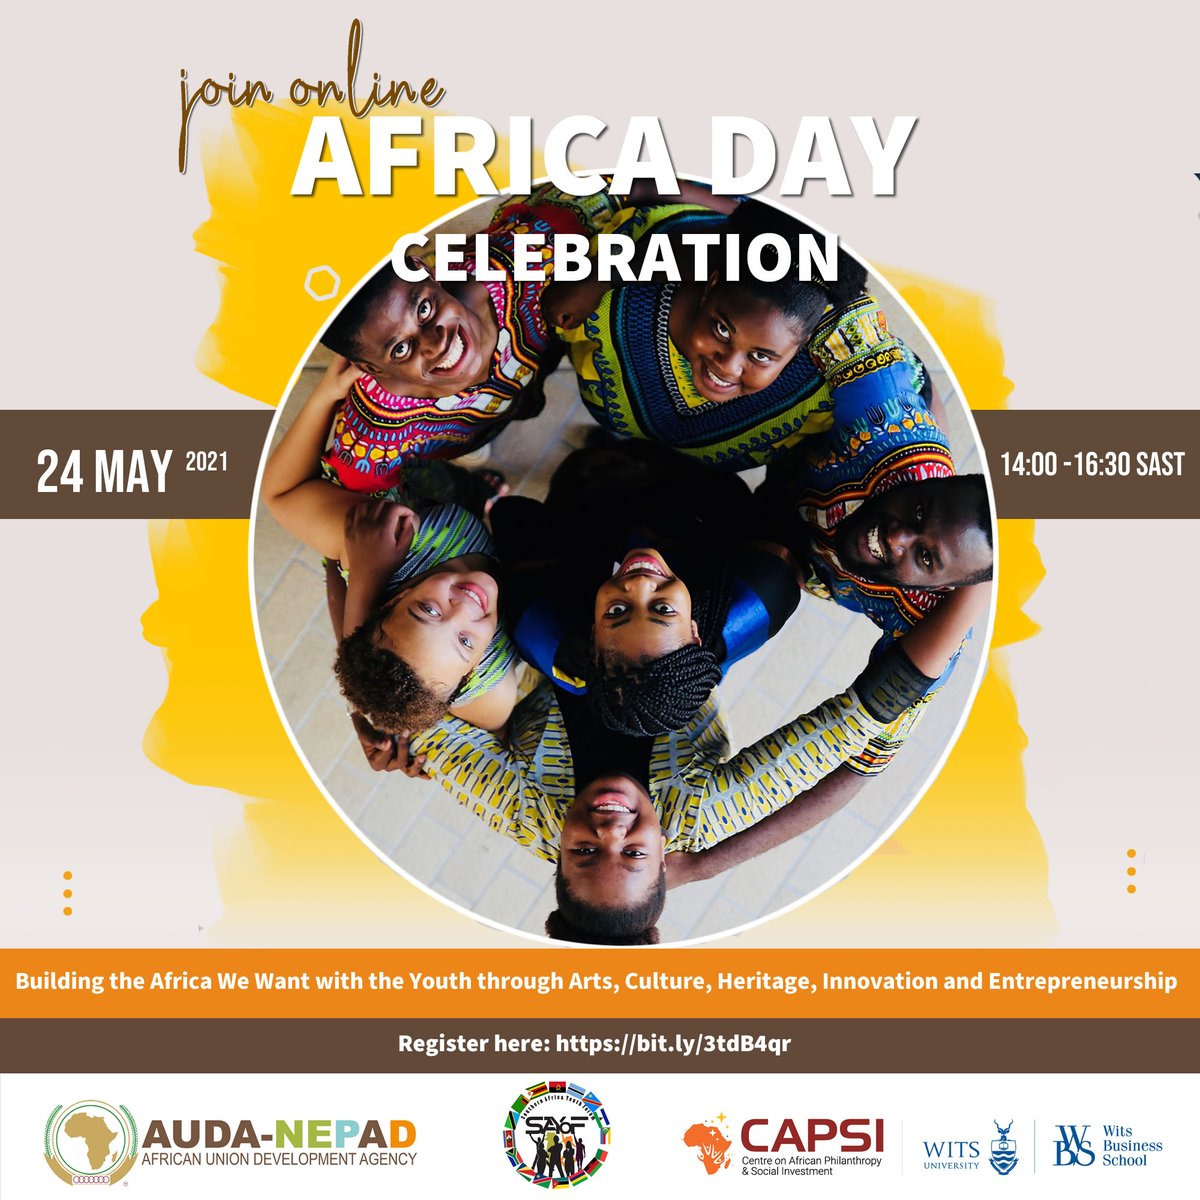 We are excited to celebrate #AfricaDay with the youth on the 24th of May 2021!

To register for the event click here: zoom.us/webinar/regist…

#AfricaMonth #PanAfrican #Africanhistory #Heritage #Culture #Africanunity #Africaninnovation #Africanentrepreneur #AfricanArt #AU